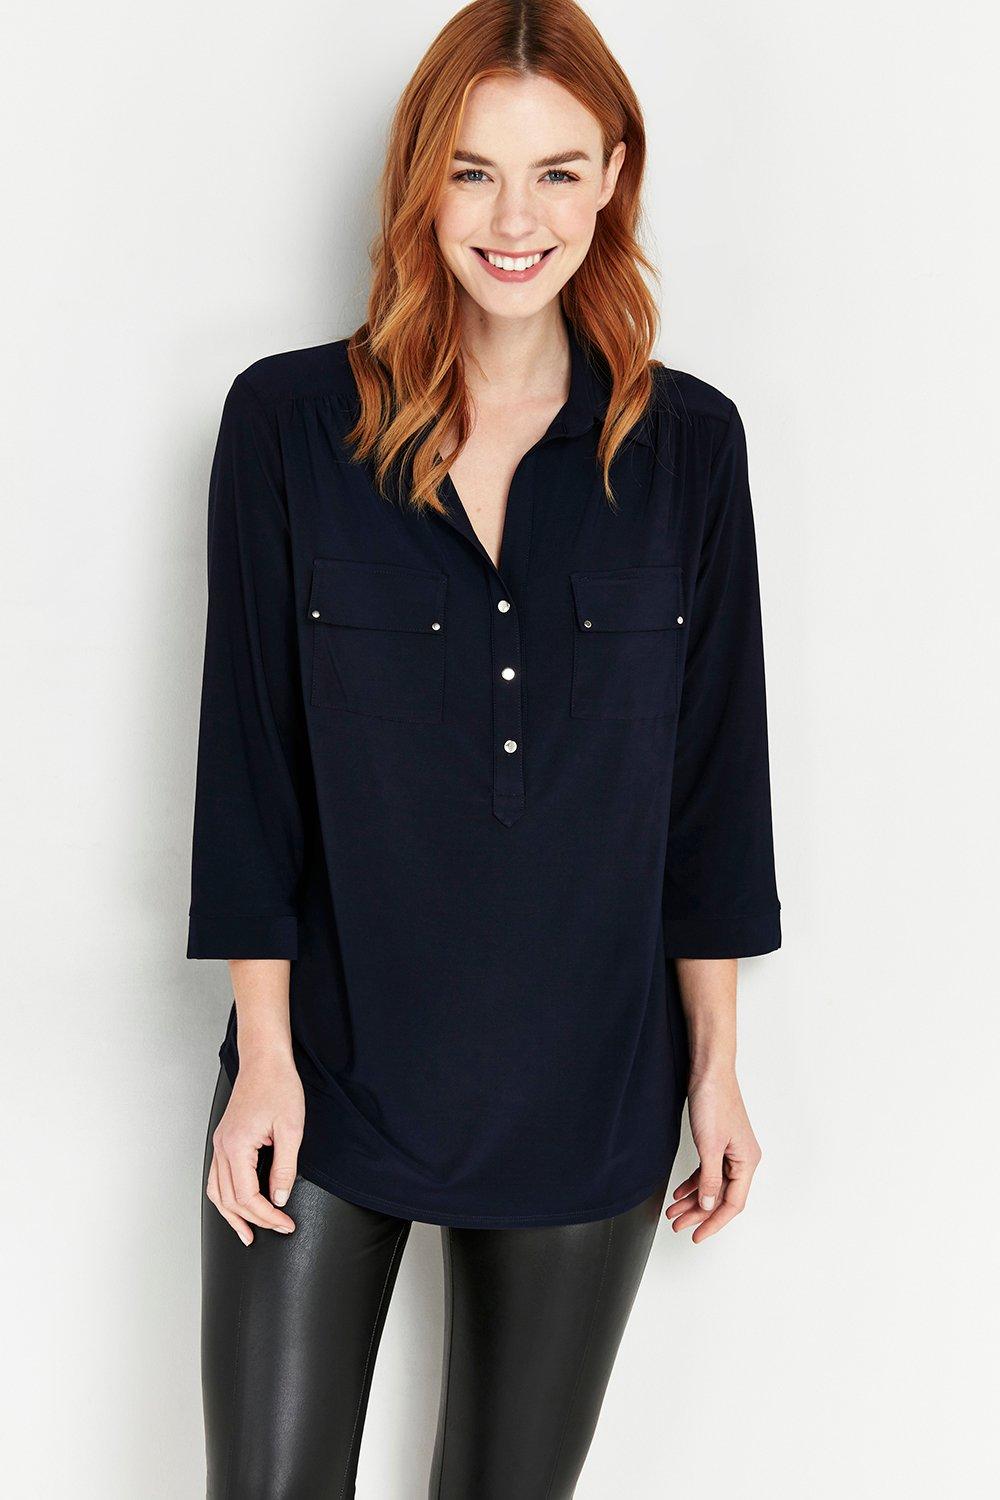 Pick Up A Versatile Staple With This Must-Have Navy Shirt. A Sophisticated Navy Hue, But Relaxed Fit And Jersey Fabric Makes This The Perfect Wear Anywhere Top. Team With Jeans And Trainers For Easy Everyday Style.  Top V-Neck 3/4 Sleeve Relaxed Casual 95